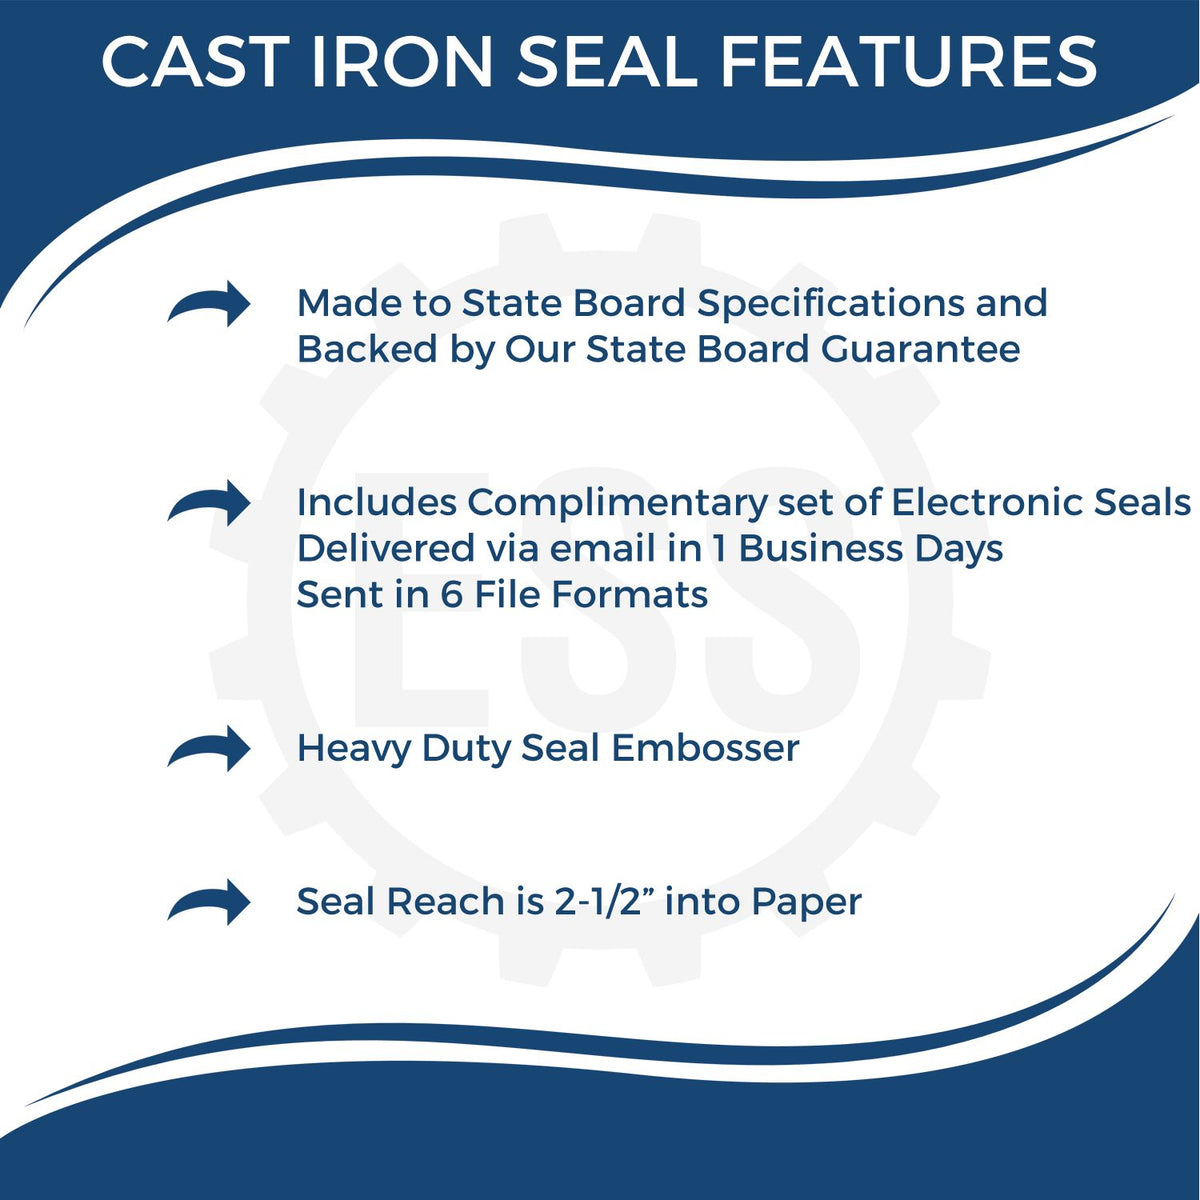 A picture of an infographic highlighting the selling points for the Heavy Duty Cast Iron Delaware Architect Embosser